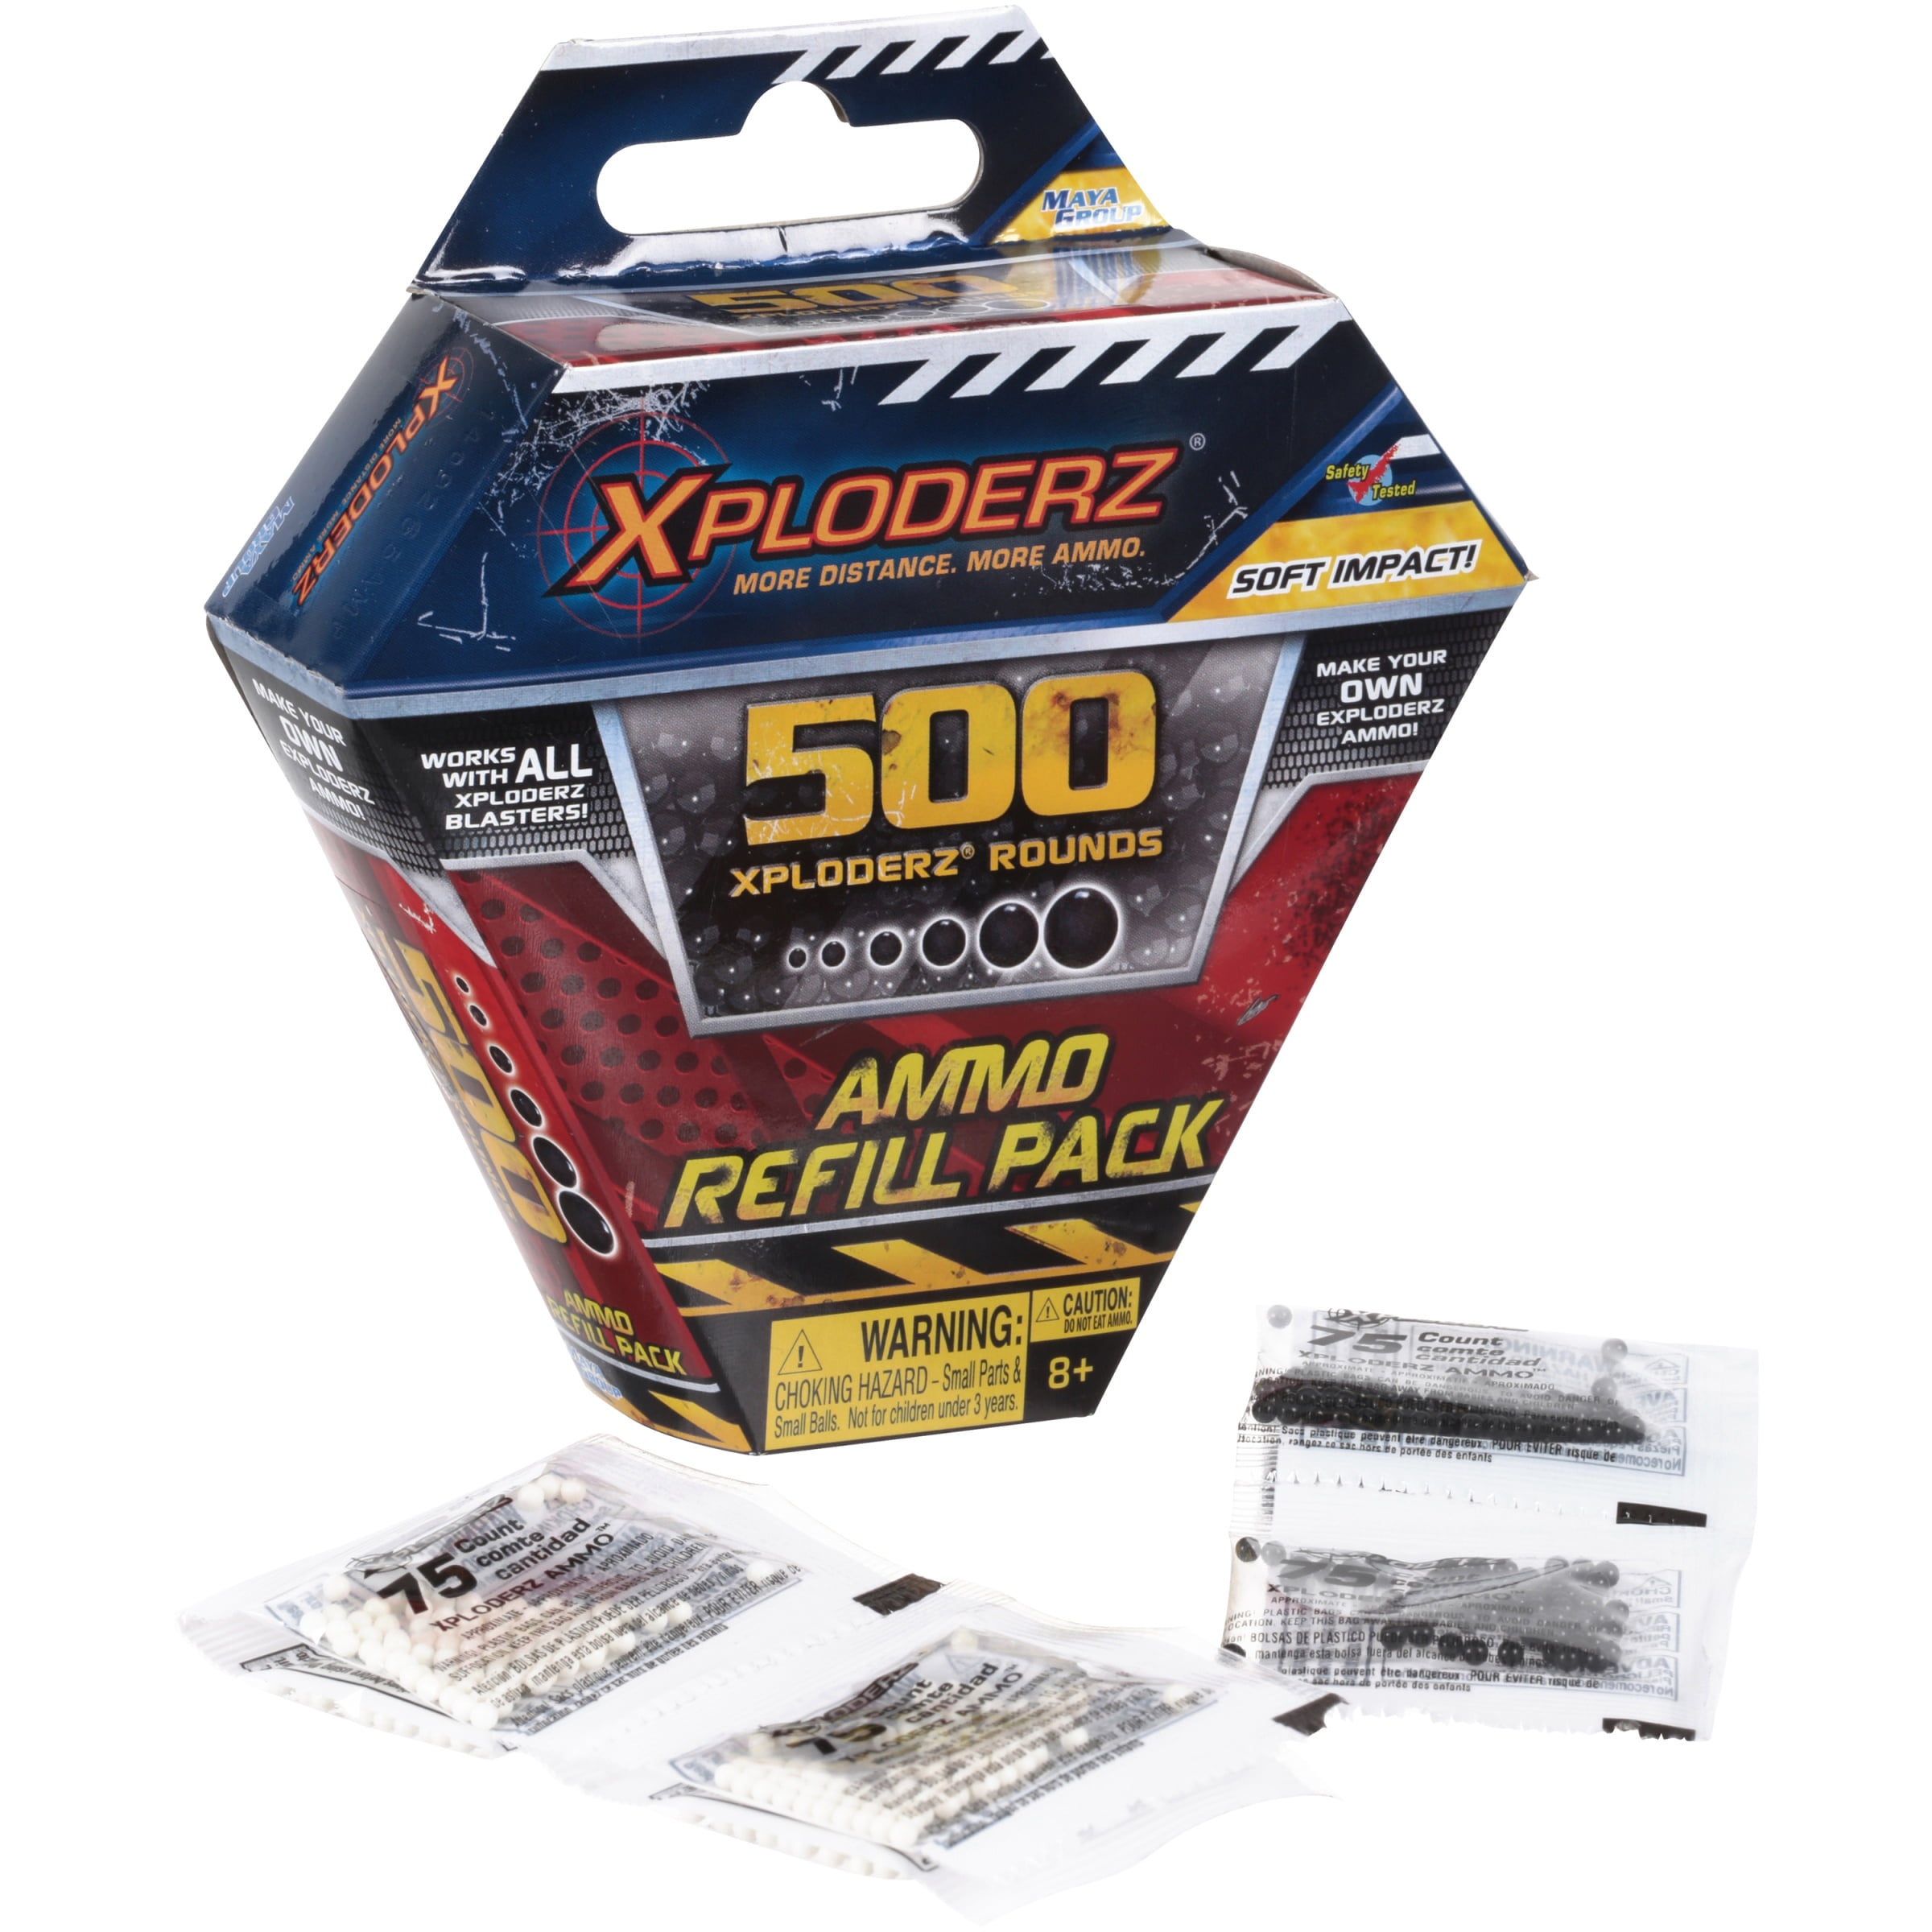 Xploderz Ammo Refill Pack 500 Ready To Fire Rounds For All Xploderz Blasters NEW 